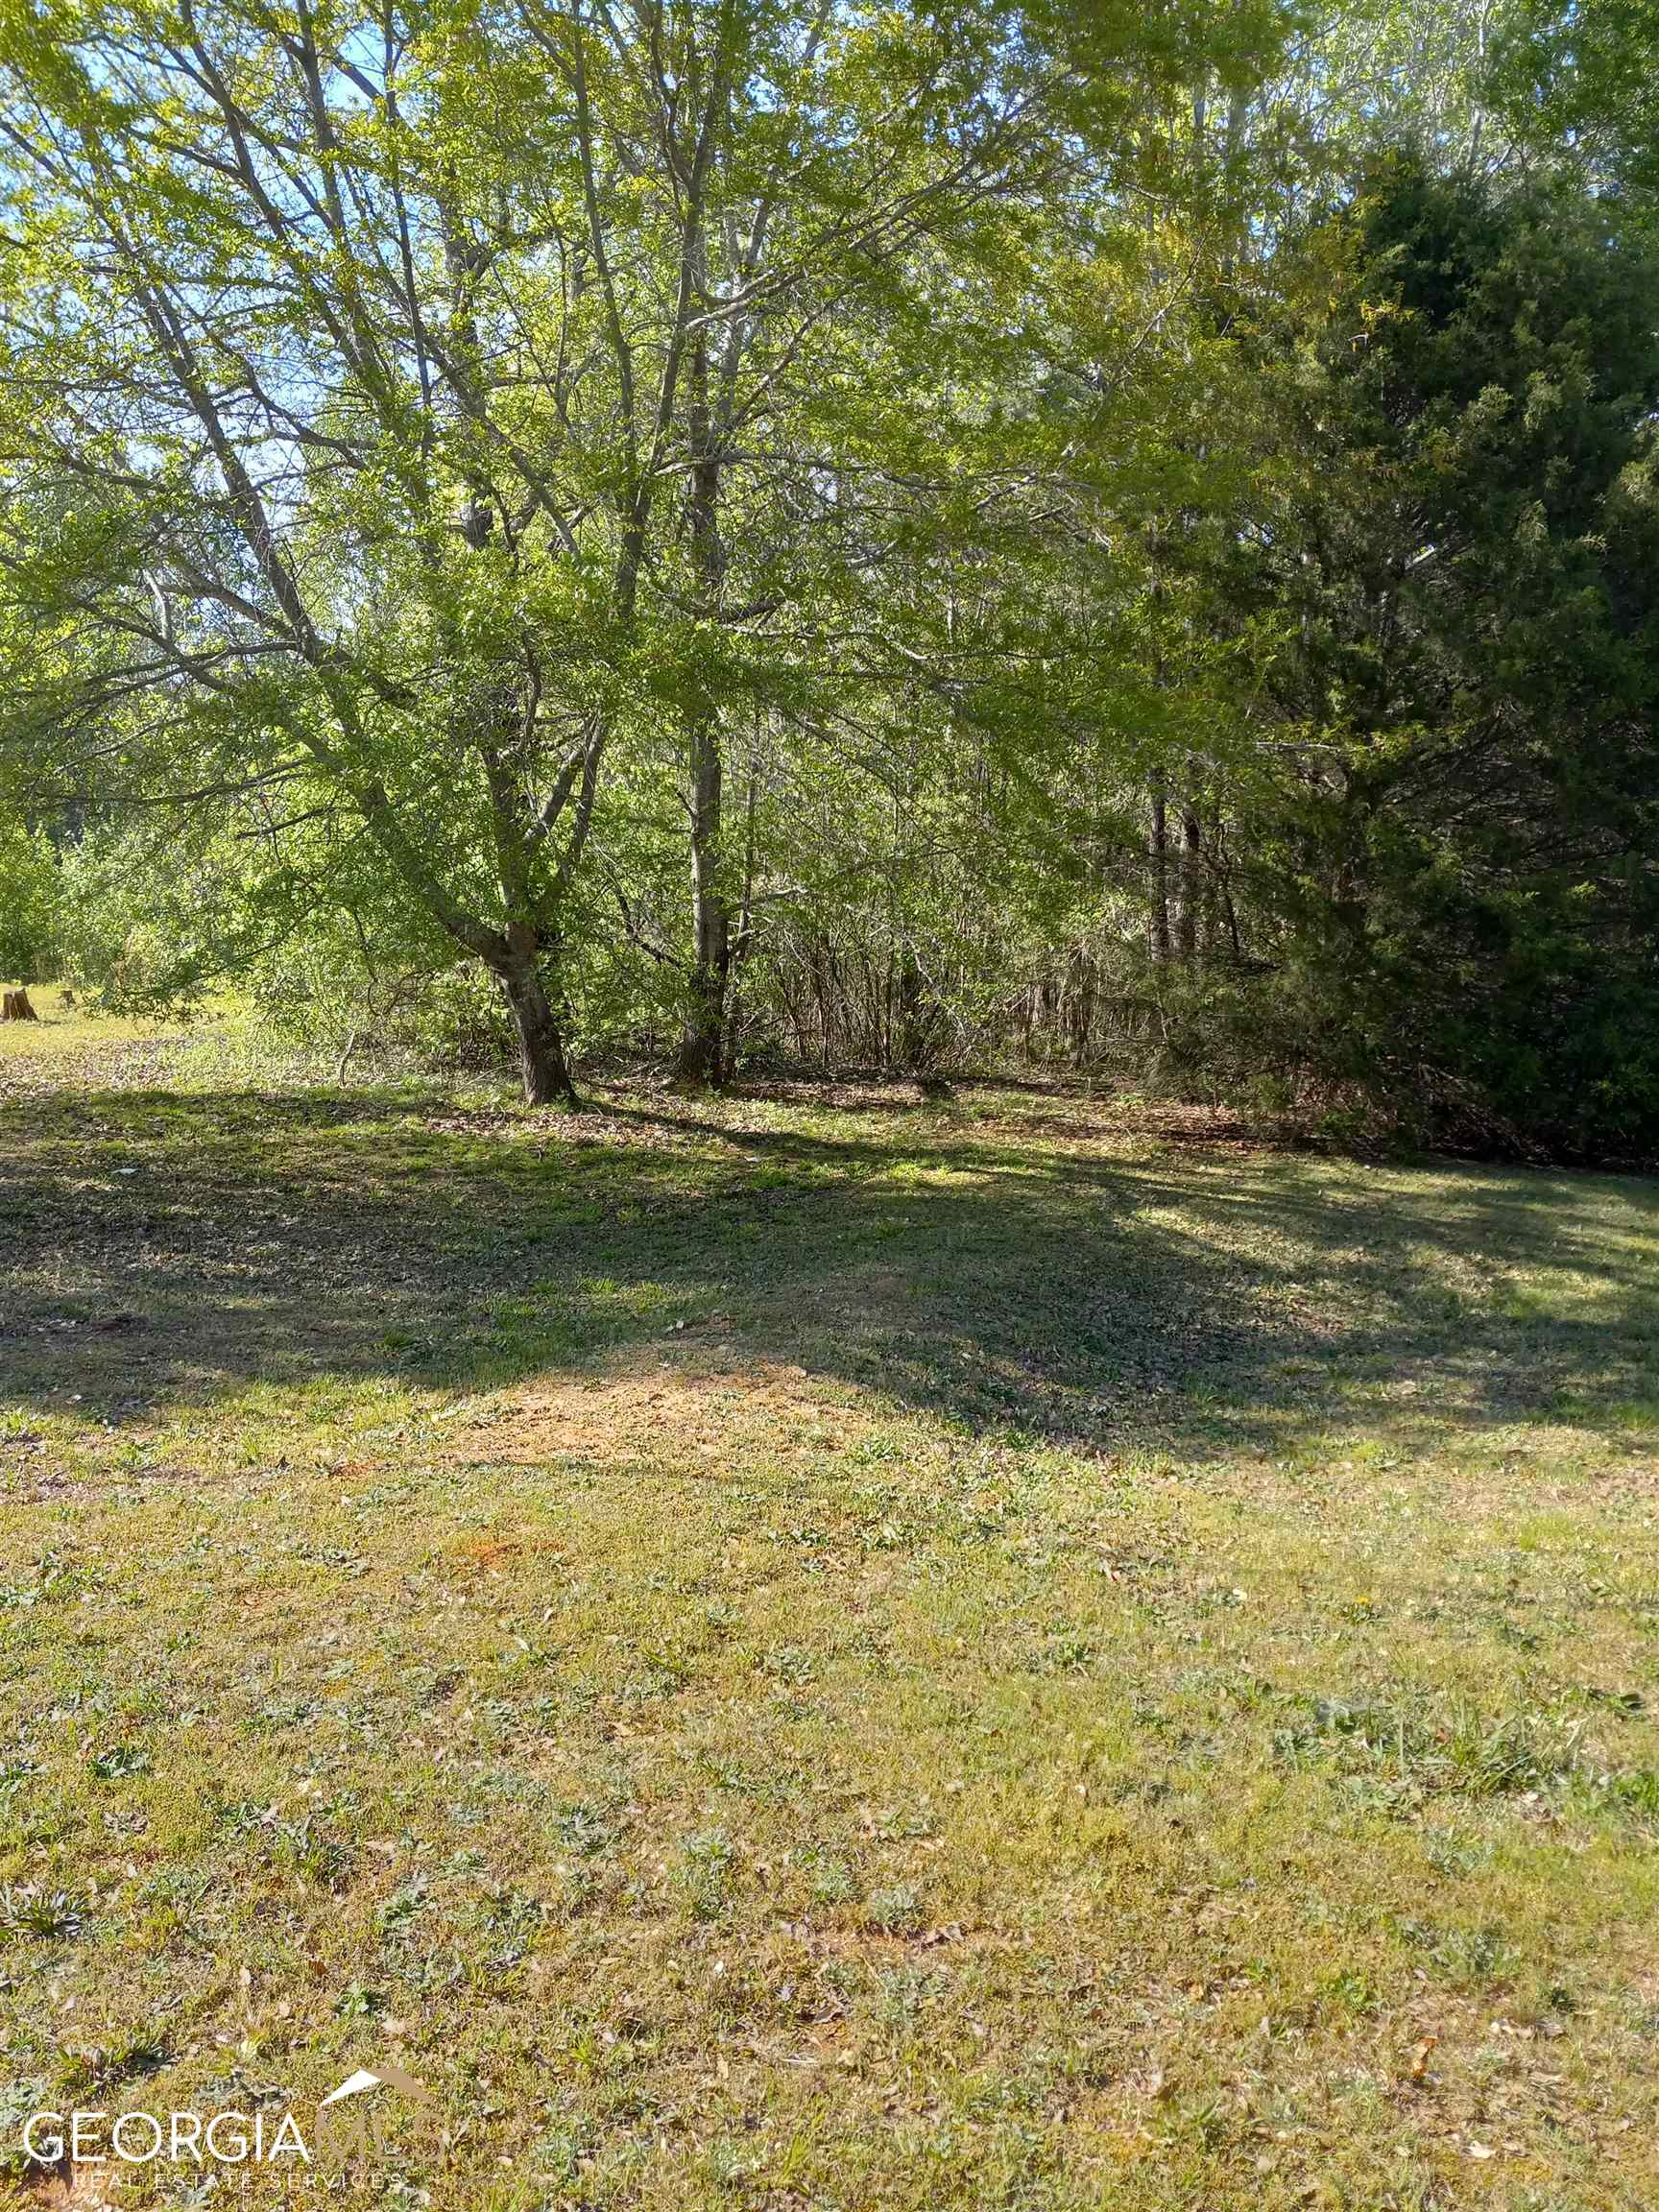 View Conyers, GA 30013 land